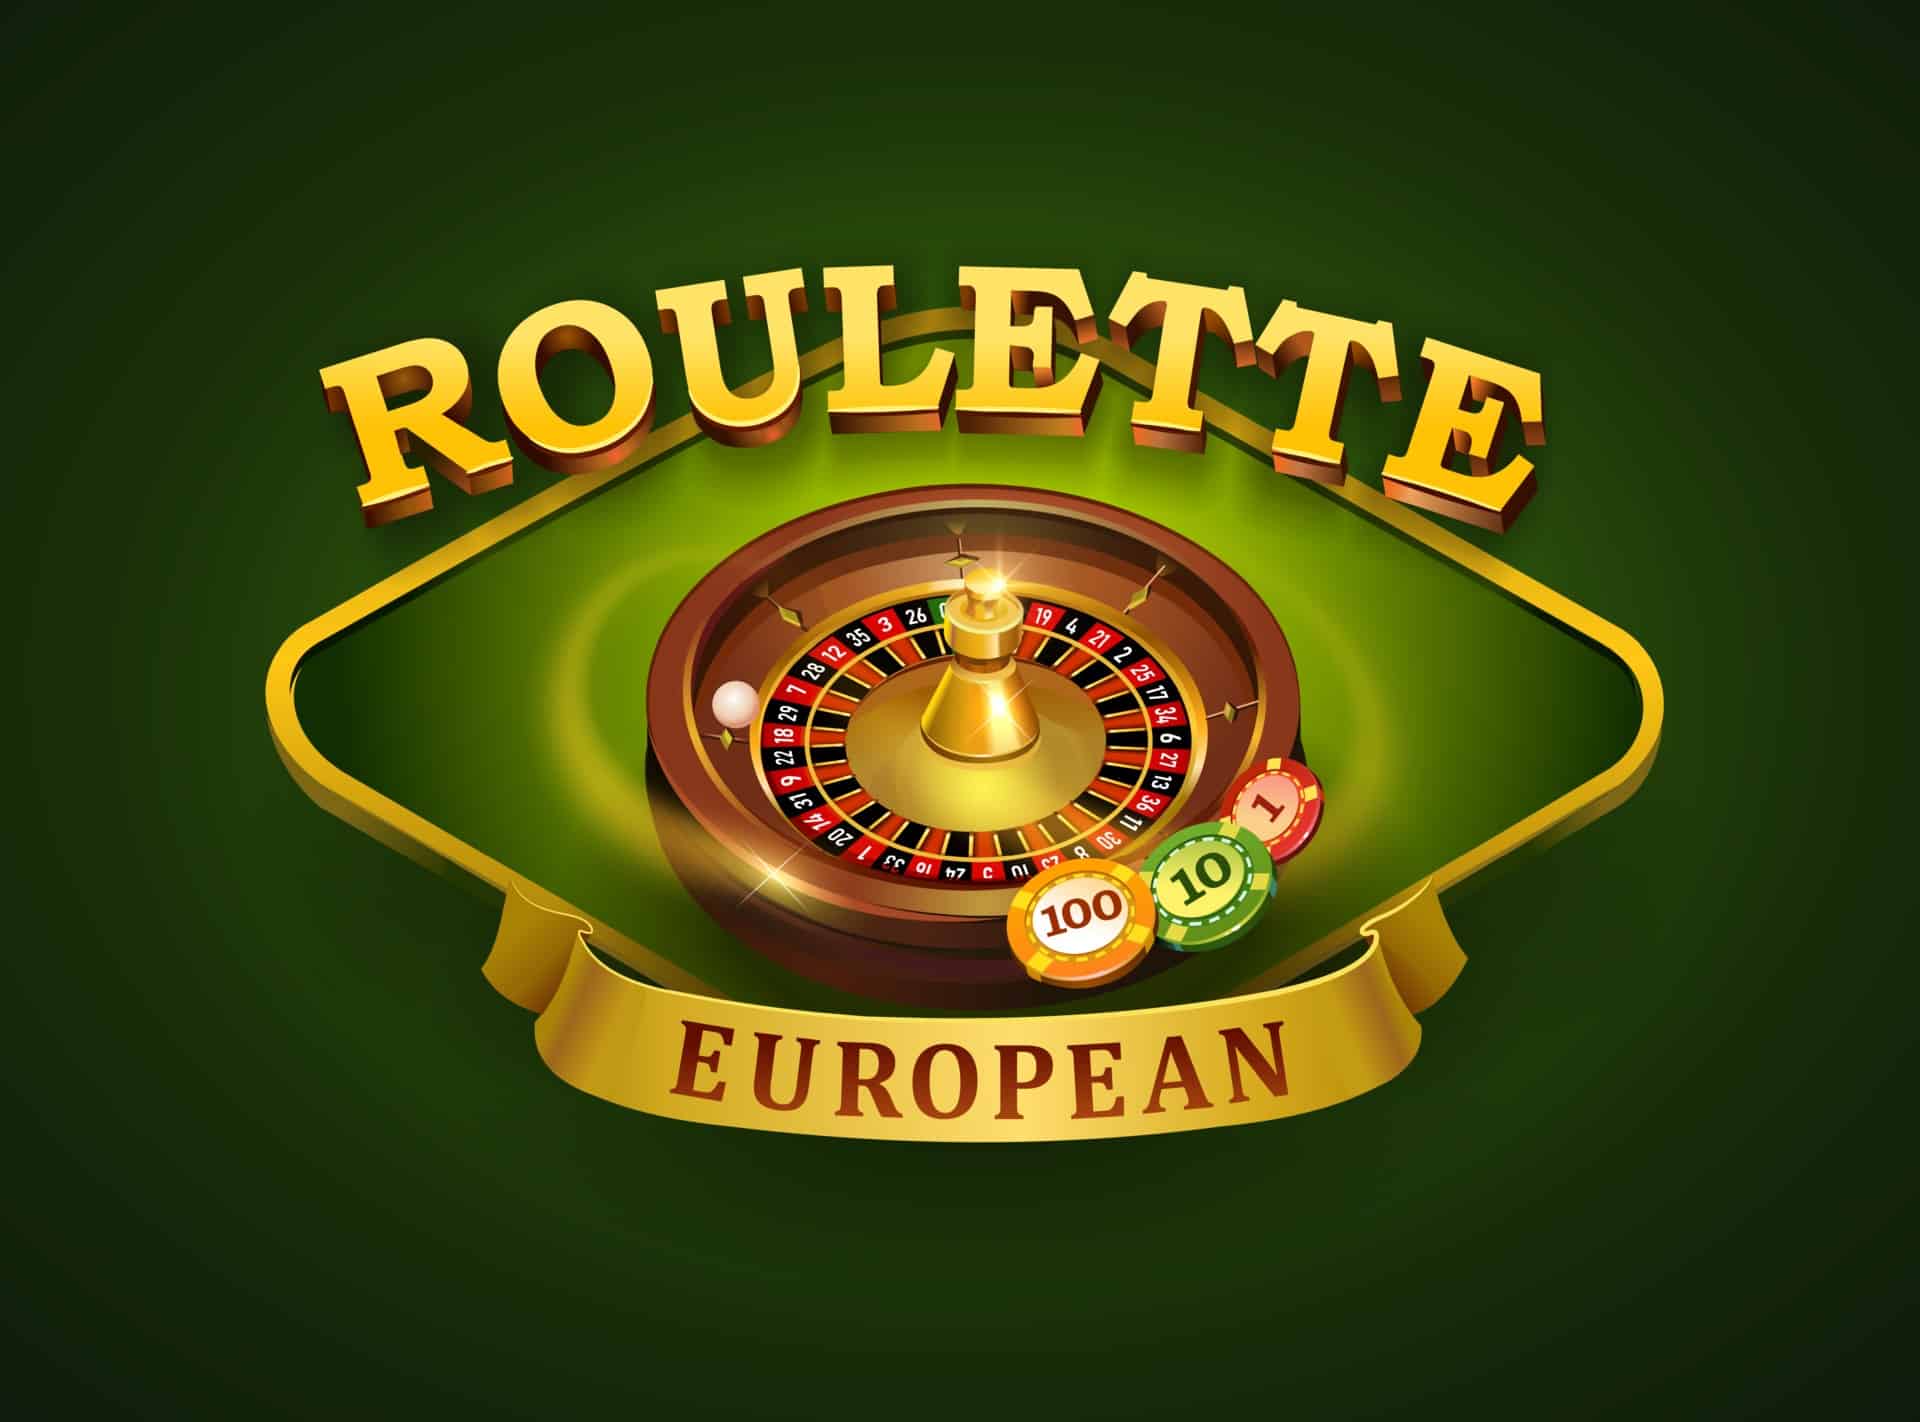 Europees Roulette